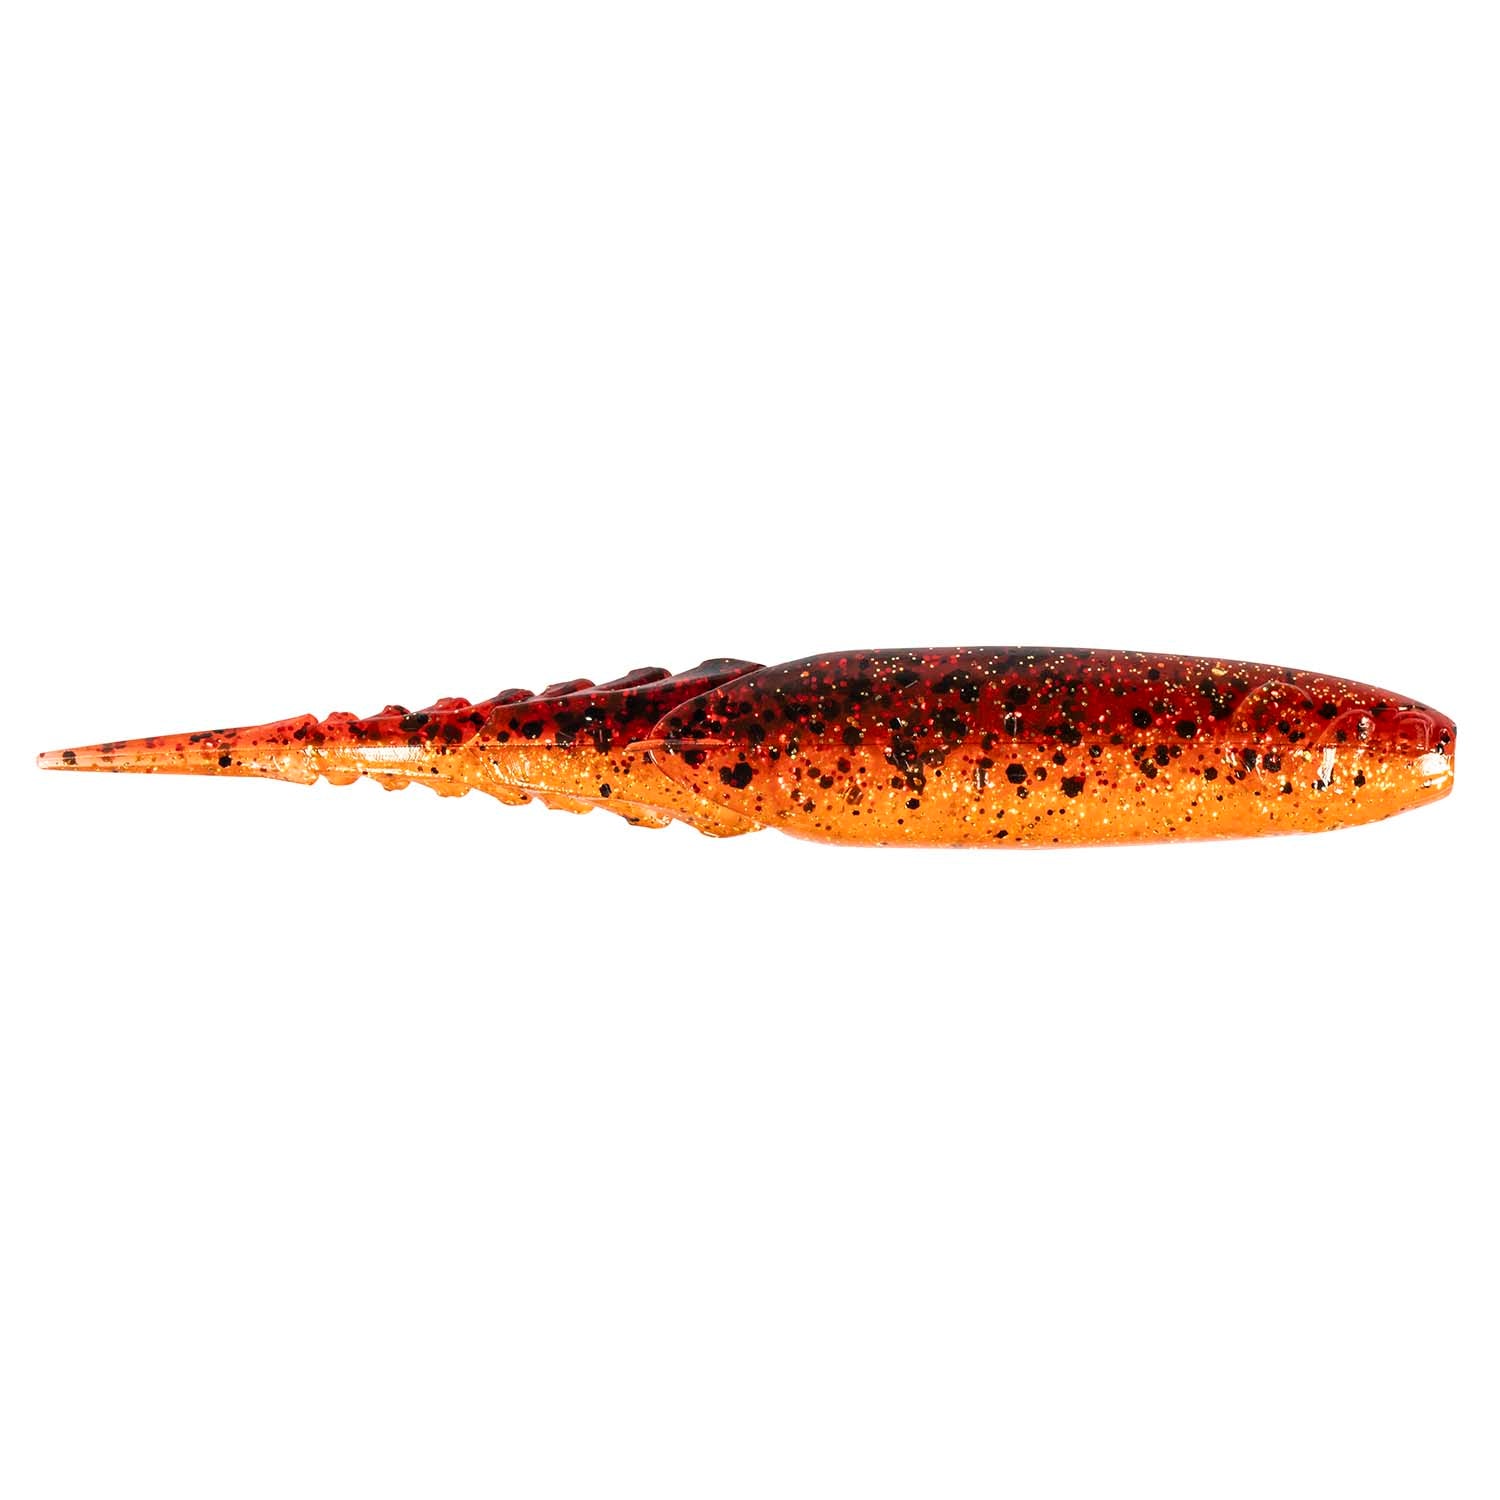 4.5 (5-pack) / Fire Craw